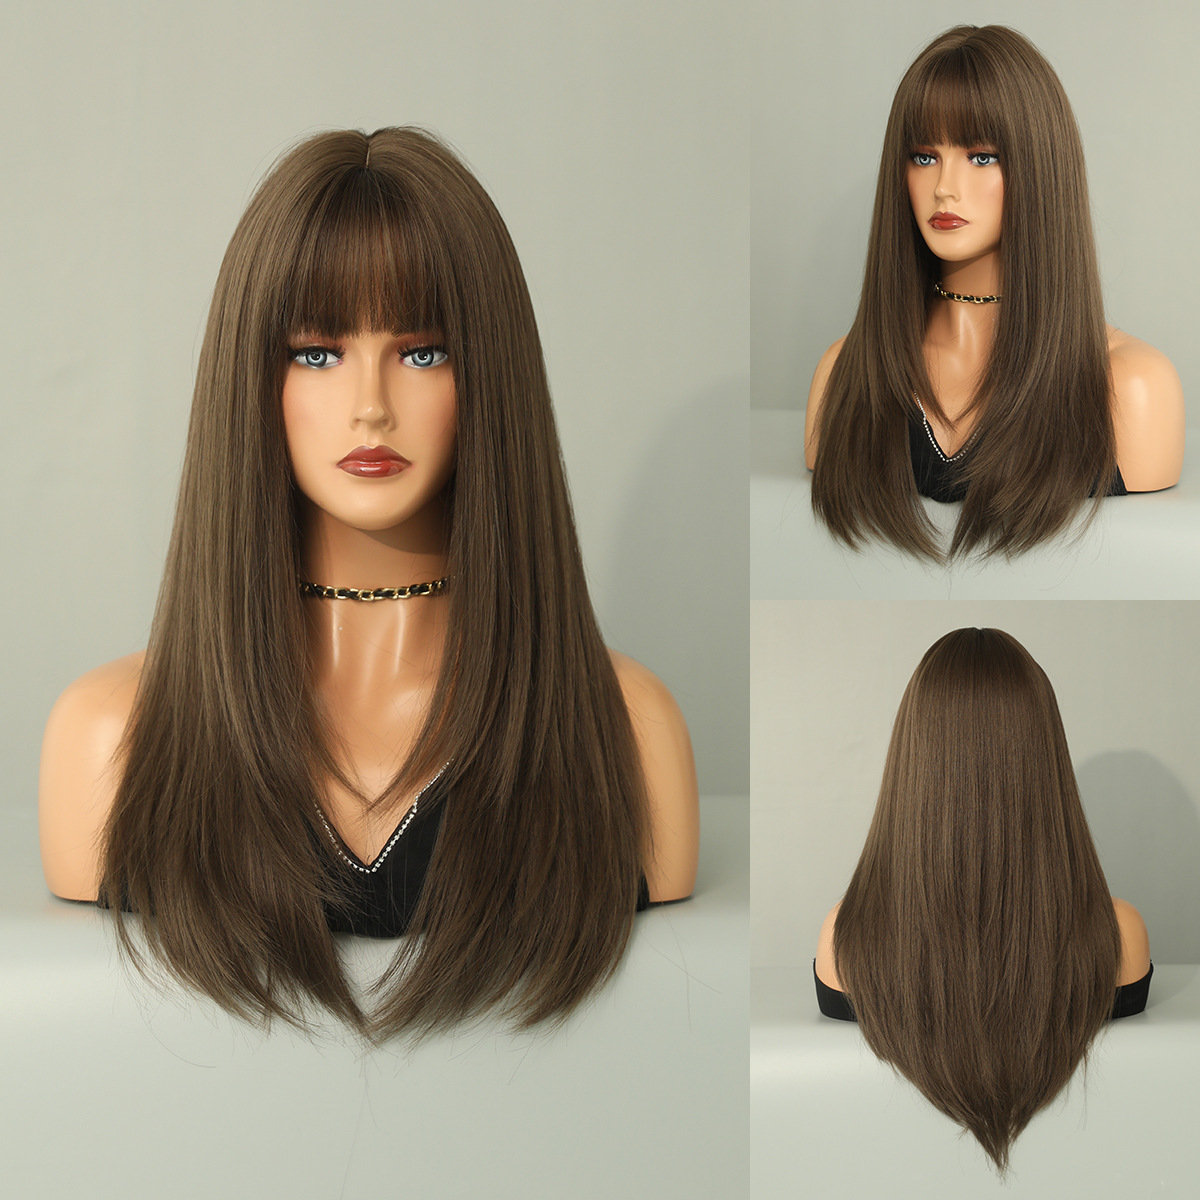 A synthetic wig featuring vibrant multicolor straight hair and stylish air bangs, ready to wear